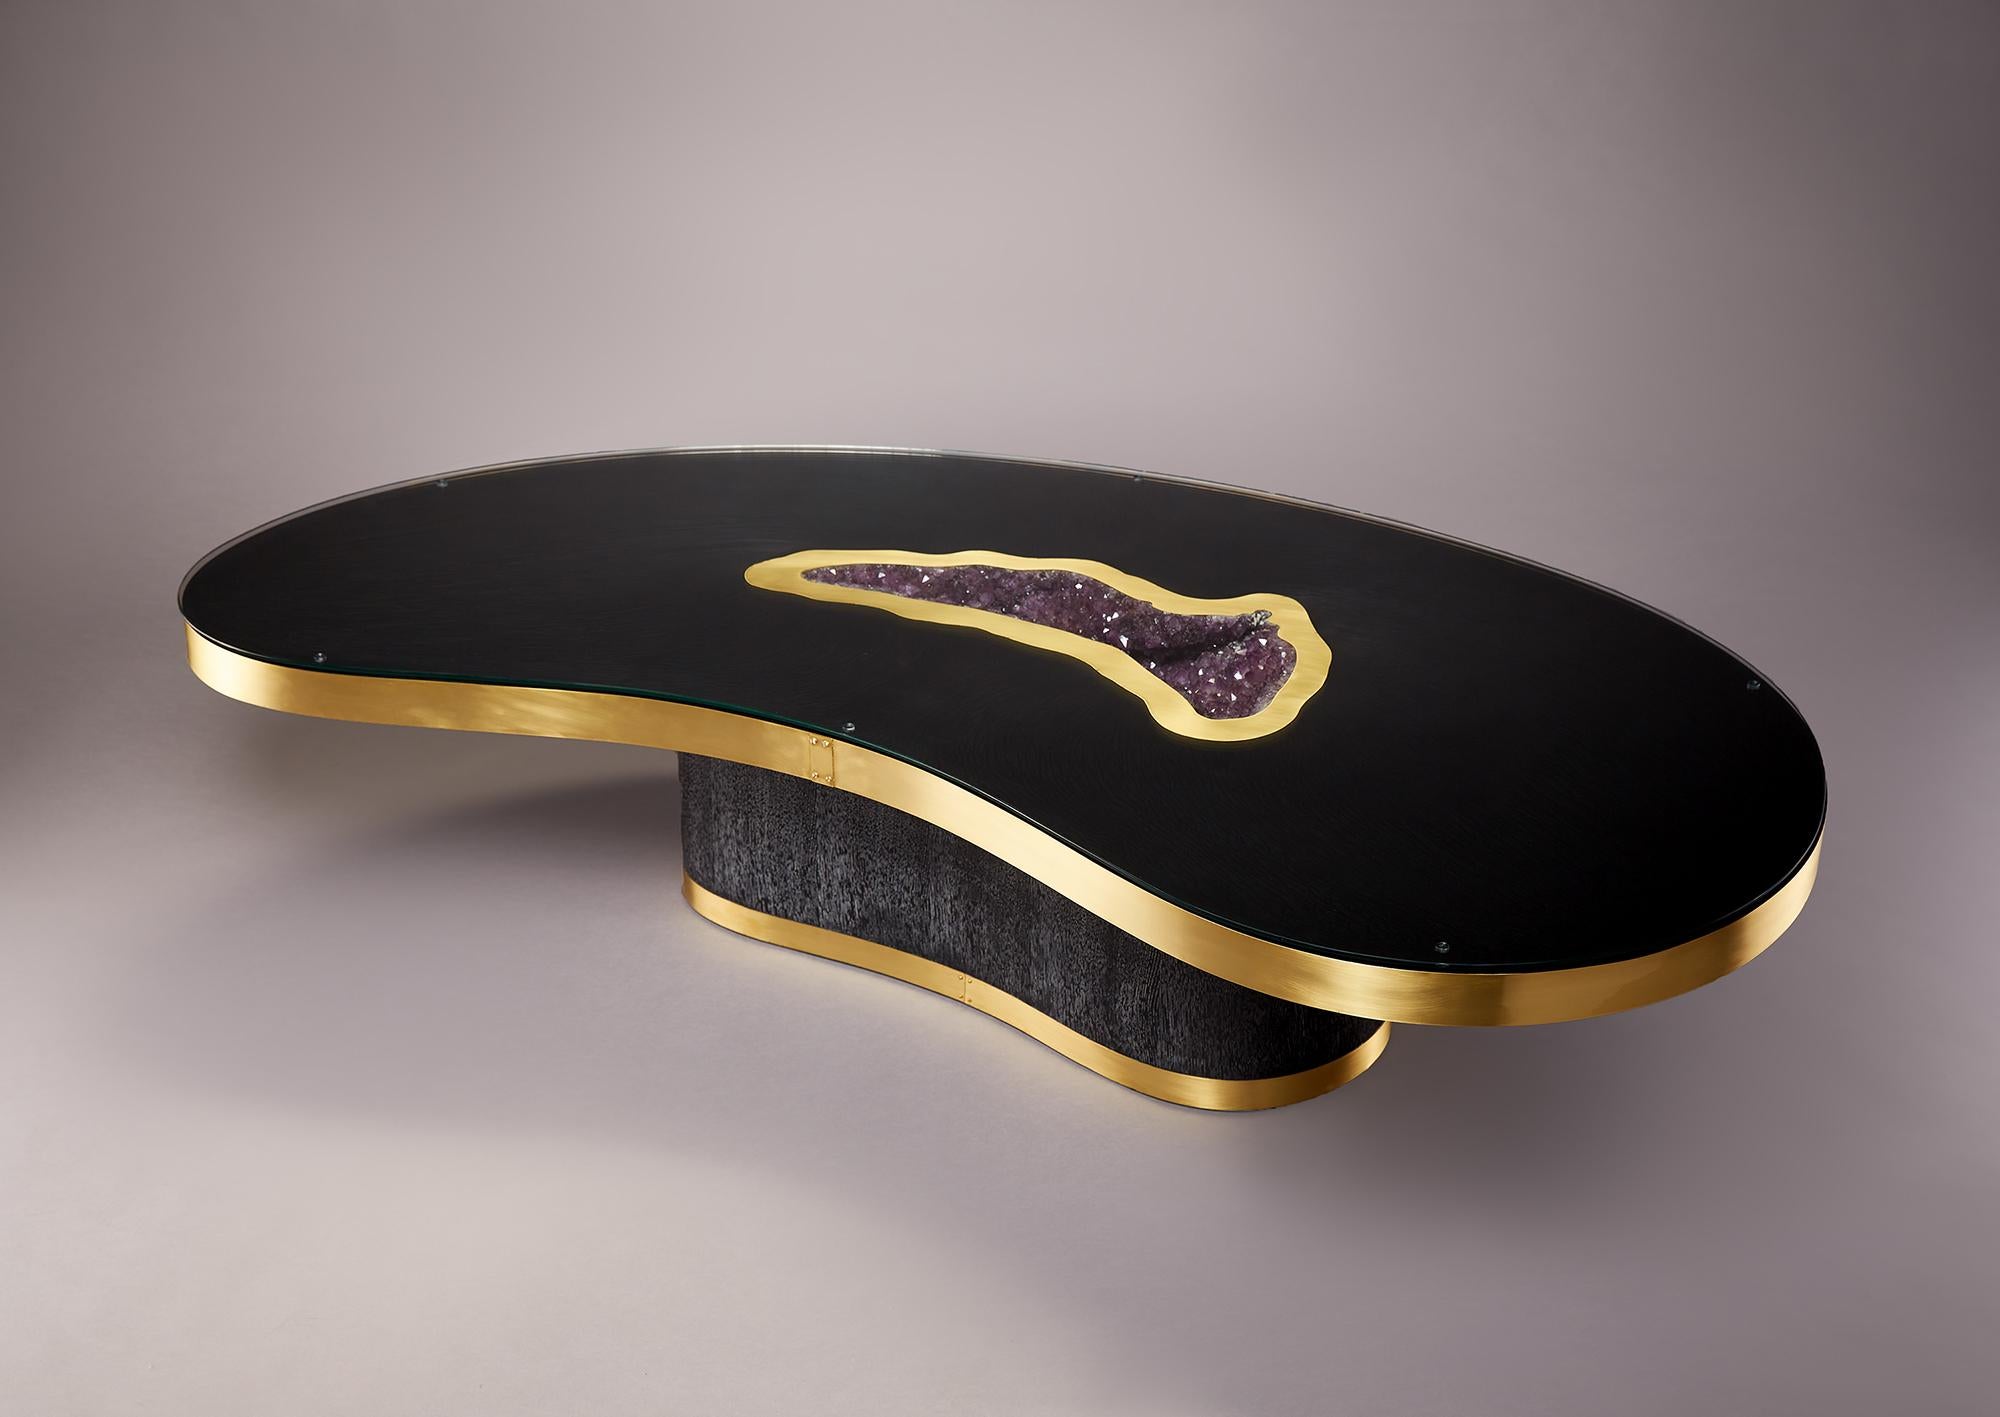 Kidney shaped amethyst geode and marbelized black resin coffee table with brass edging. Designed and made by Gallery Girasole. Second photo shown with 1/4